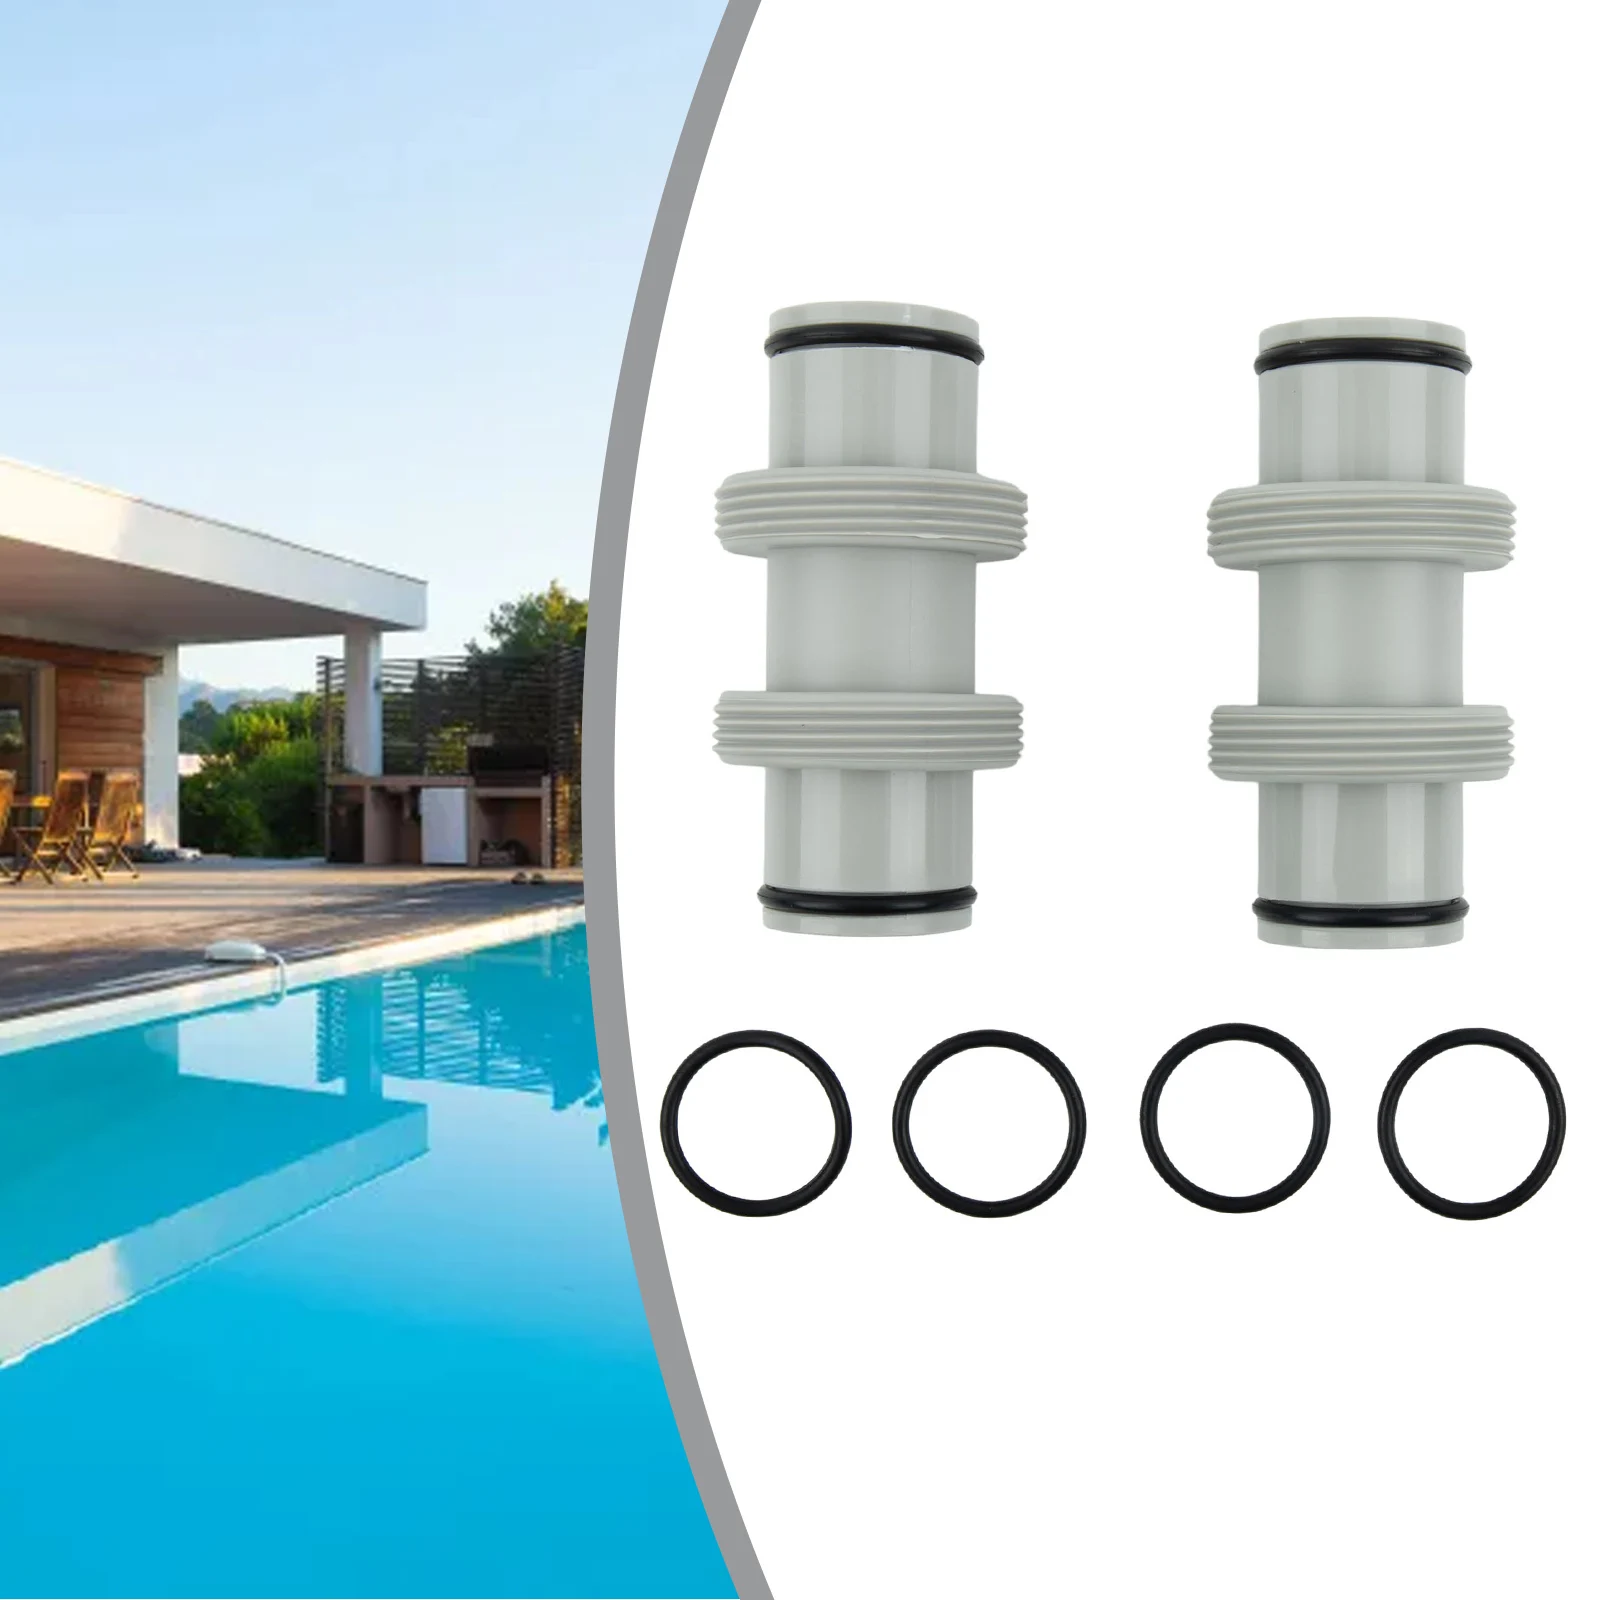 Hose Adapter For Split Hoses Plunger Valve 1.5'' Straight Connector Rubber O Rings Prevent Sun Snow Rain Resistance Pool Parts air valve adapter rubber rings spiral plastic tighter seal valves adapters strong connector accessory boat sports